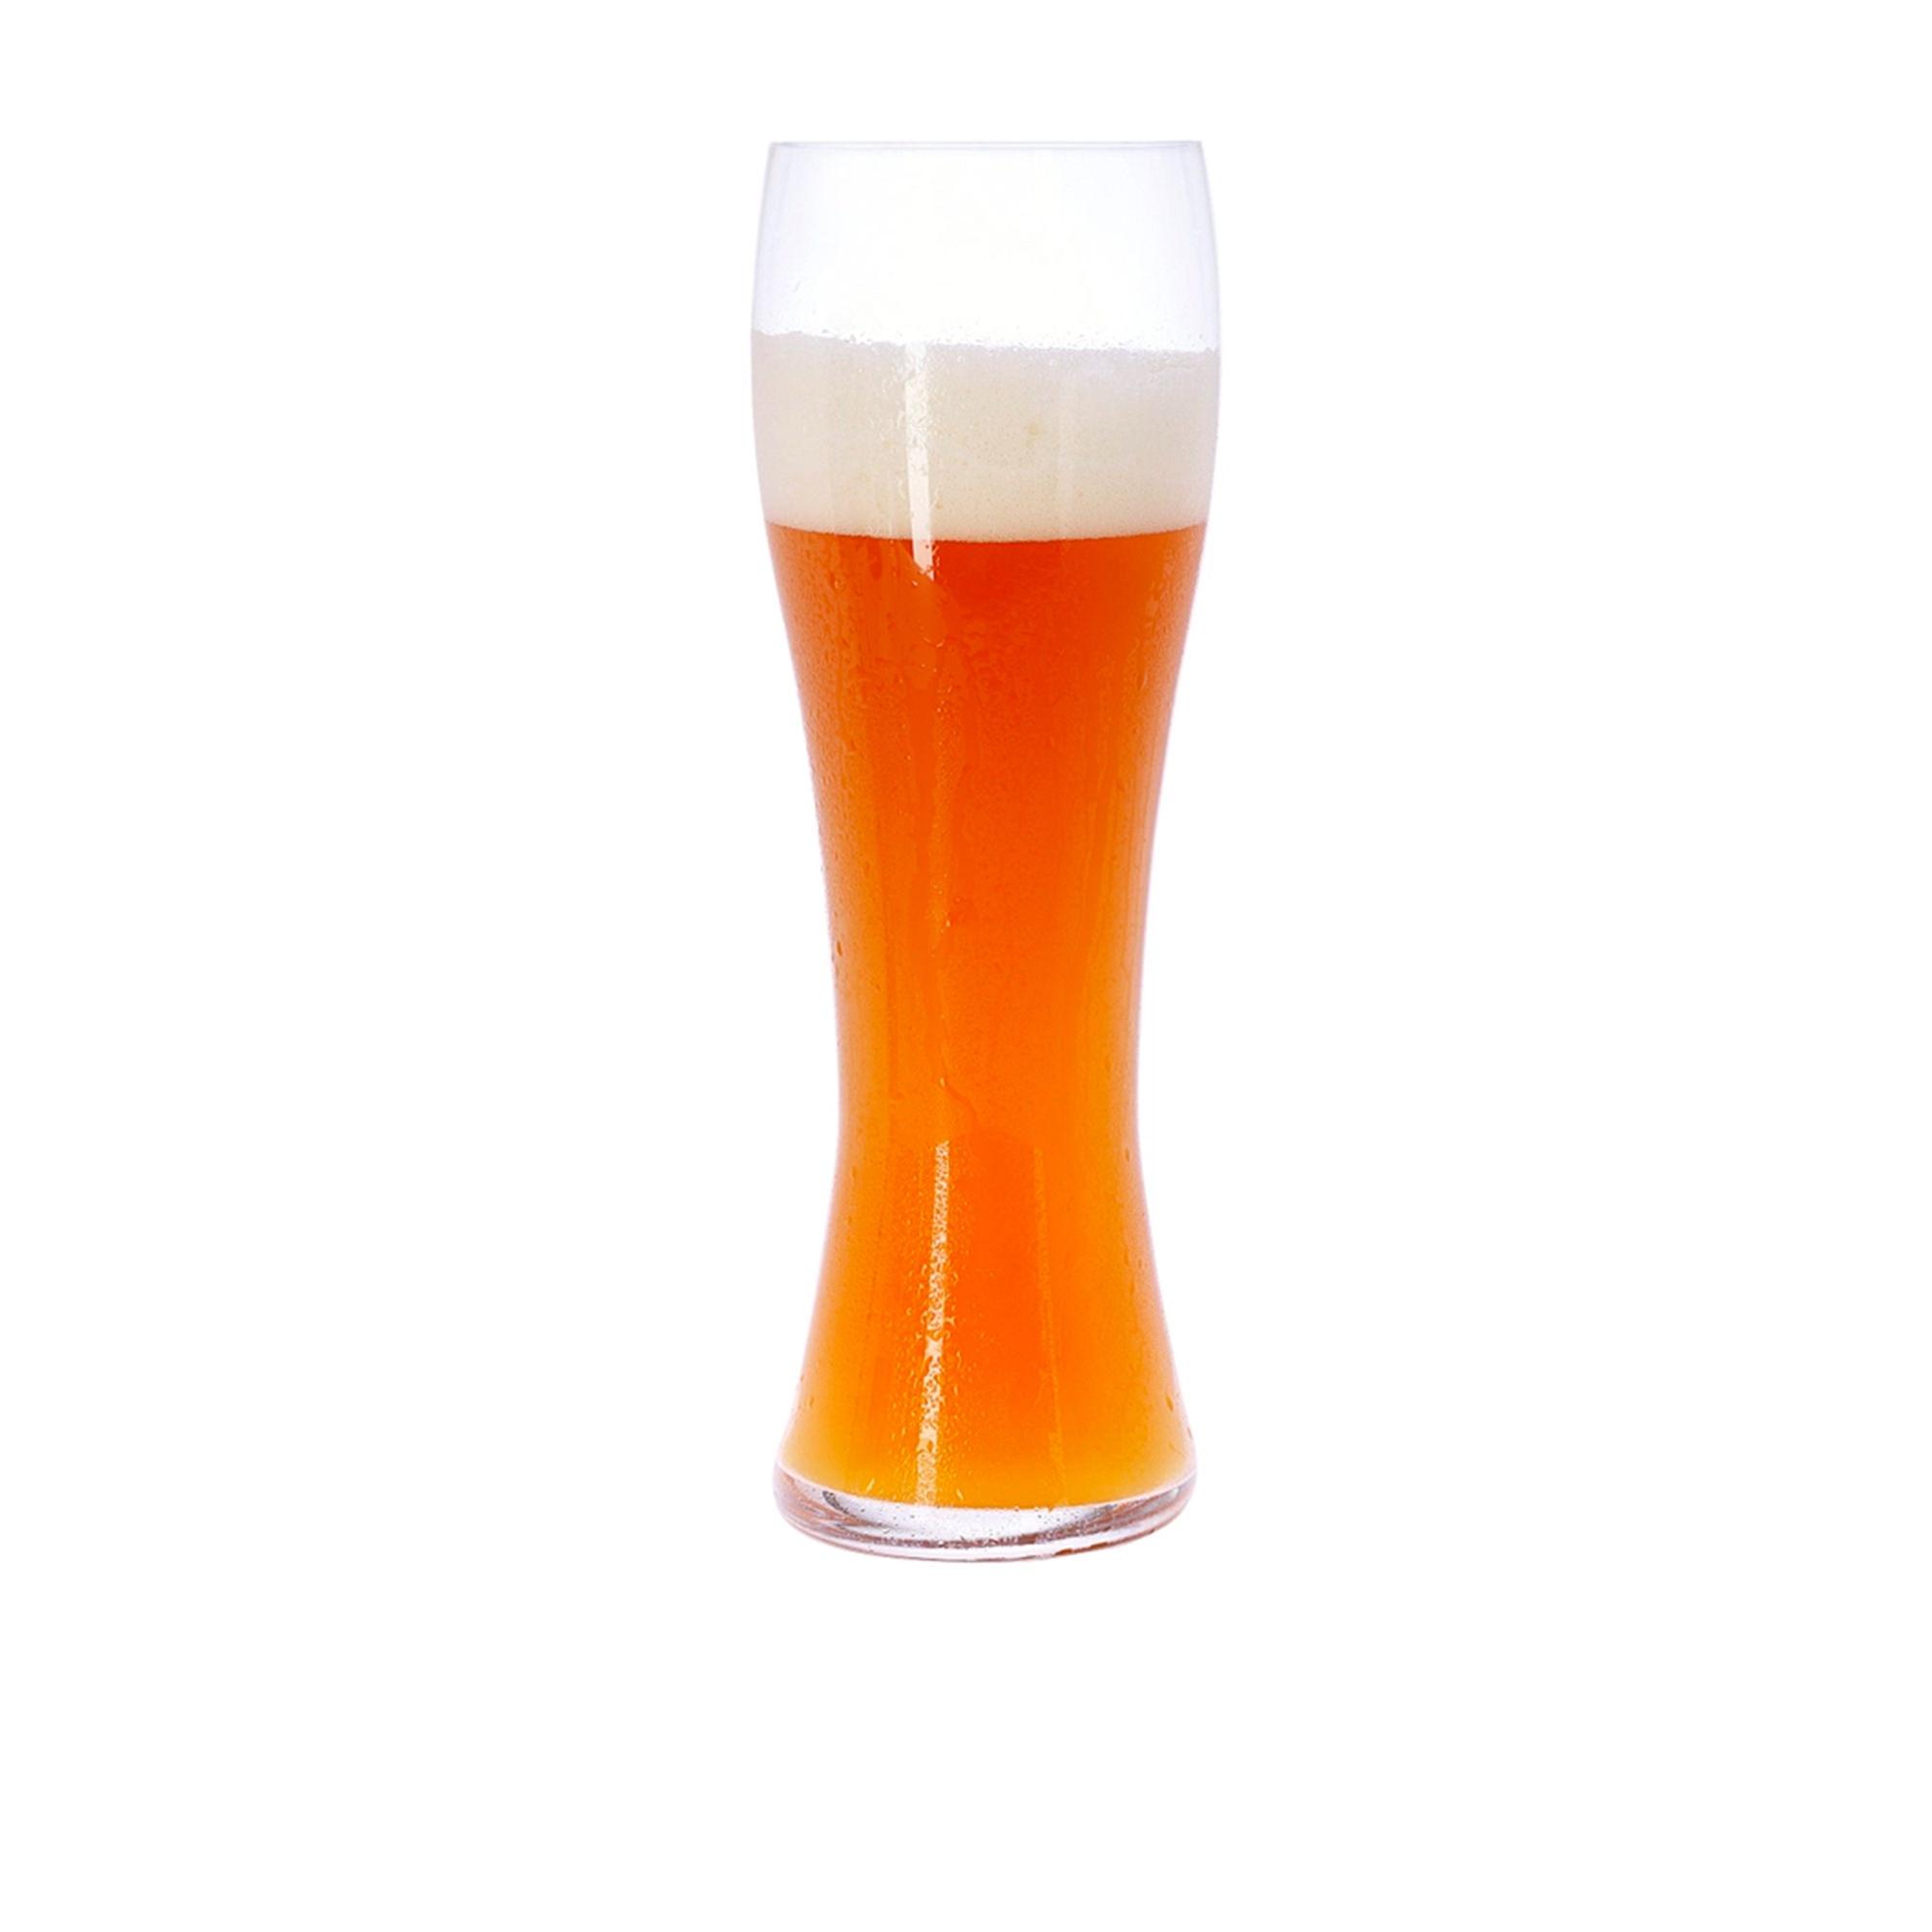 Spiegelau Beer Classics Wheat Beer Glass 700ml Set of 4 Image 5